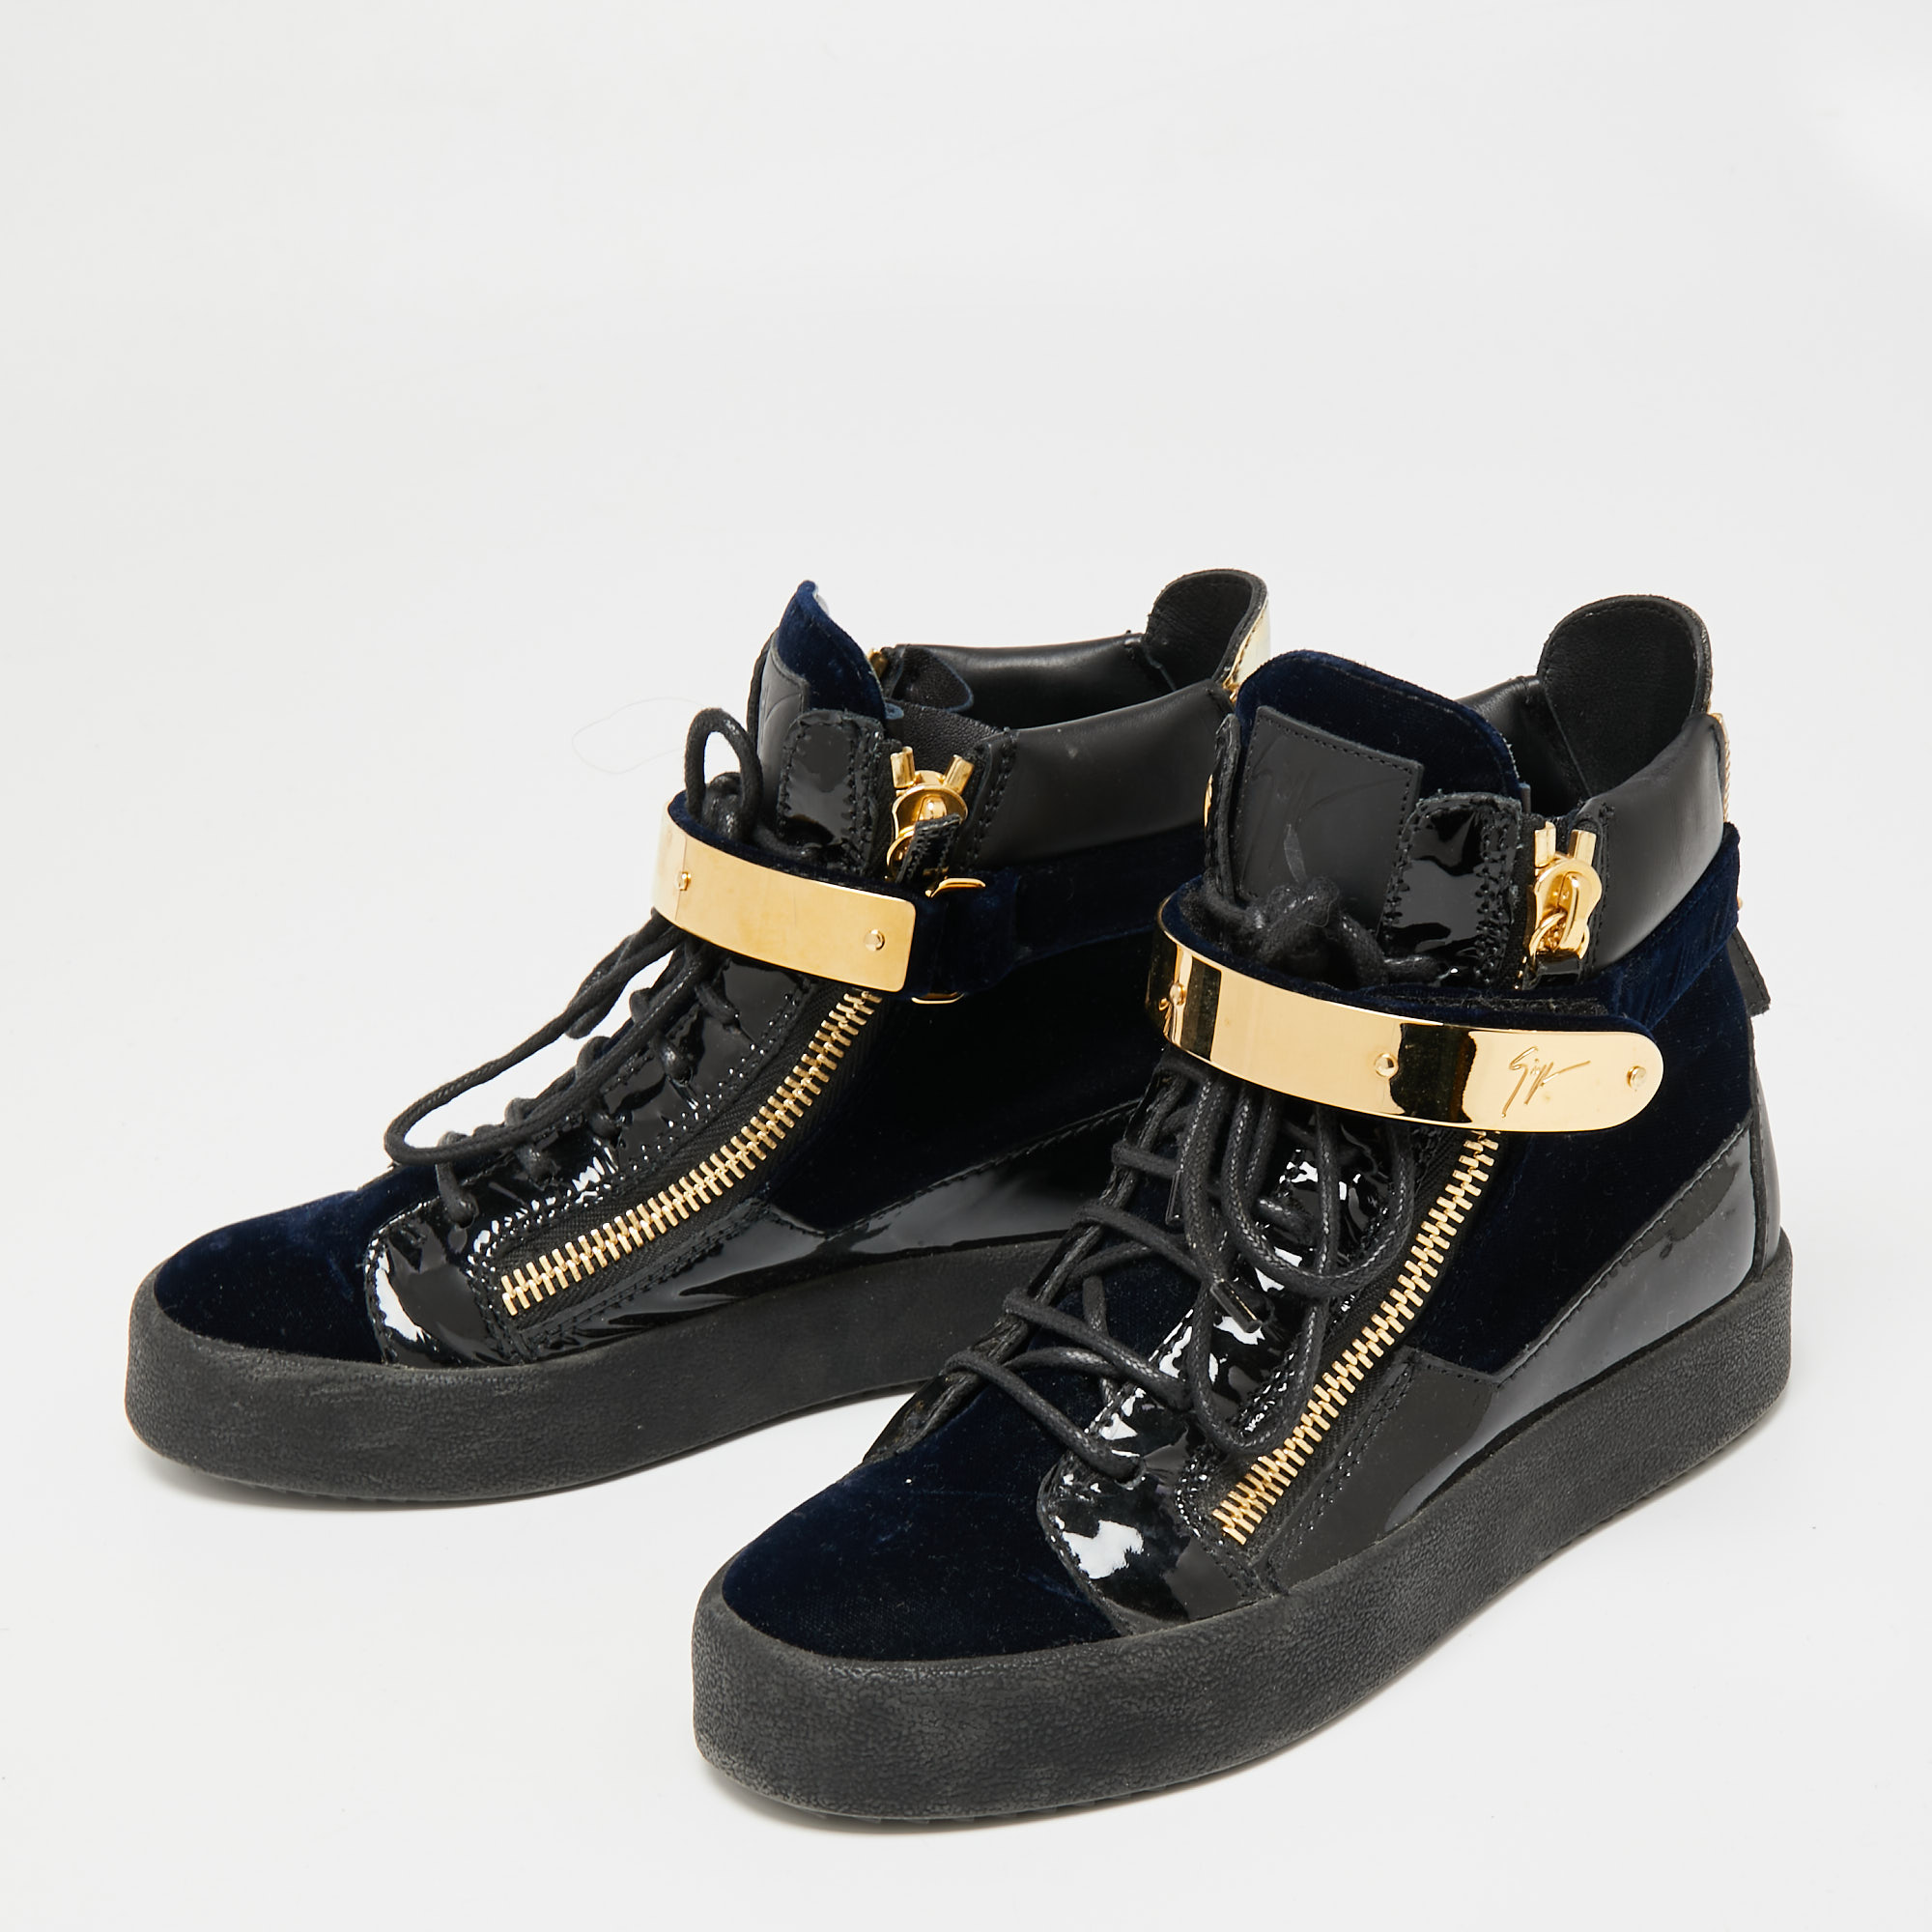 

Giuseppe Zanotti Black Velvet and Patent Leather Coby High-Top Sneakers Size